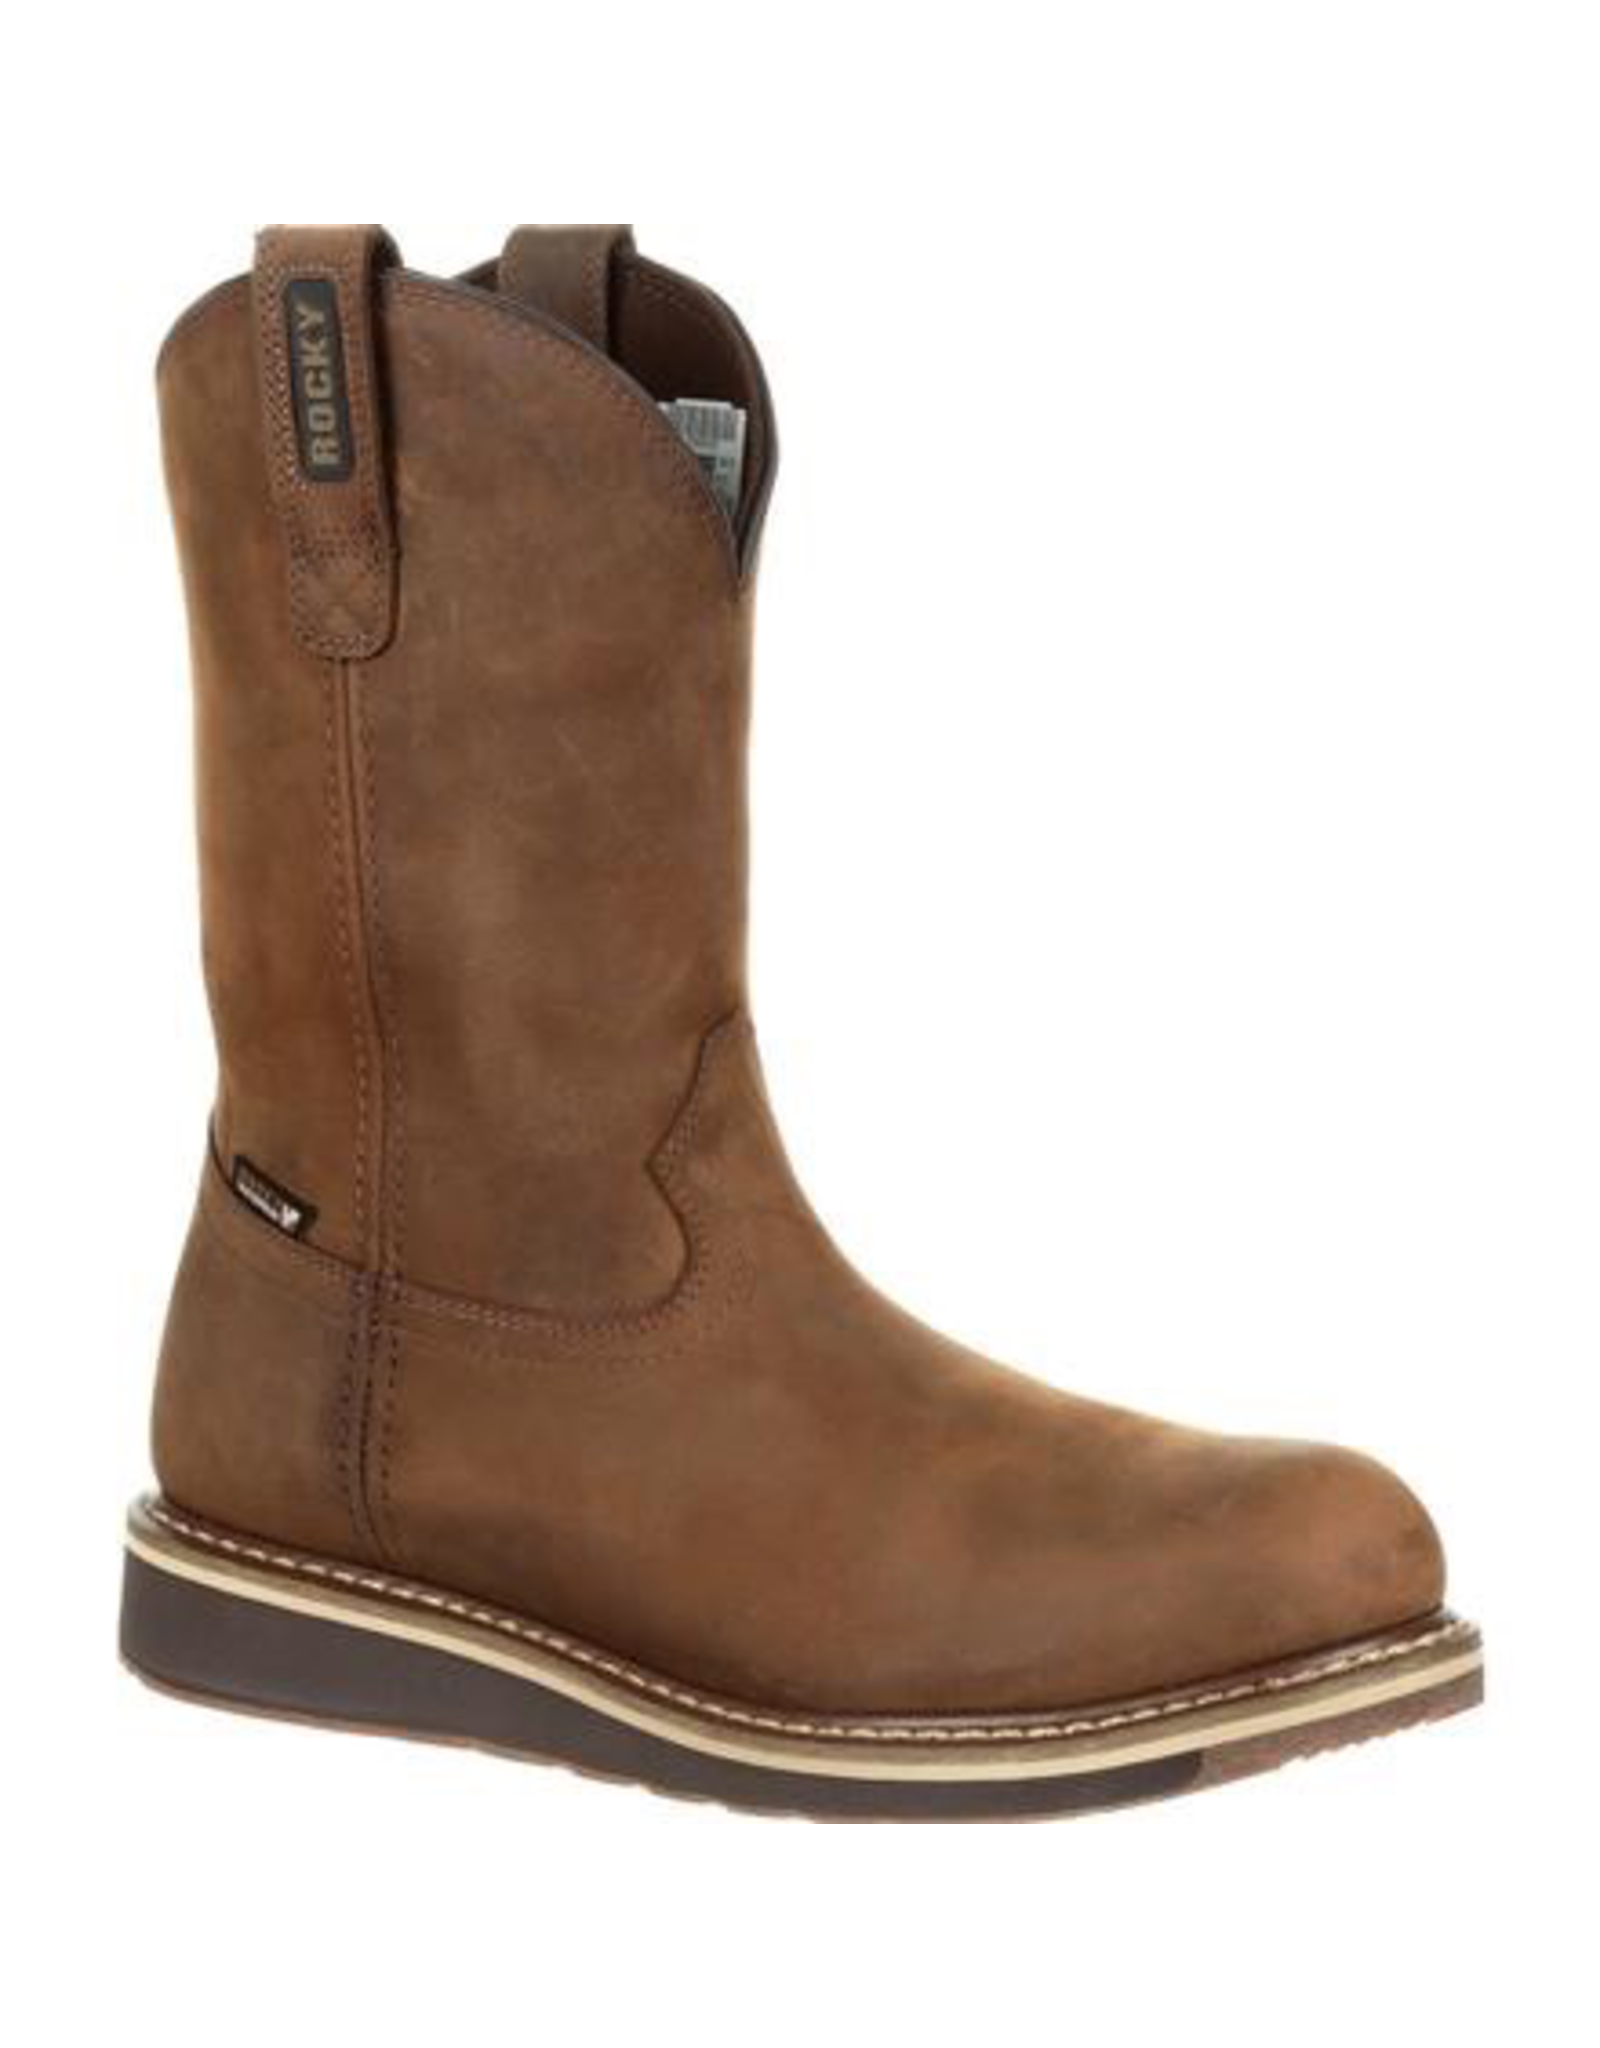 Boots-Men ROCKY RKW0239 CODY STEEL - Hewlett & Dunn Boot and Jean Company